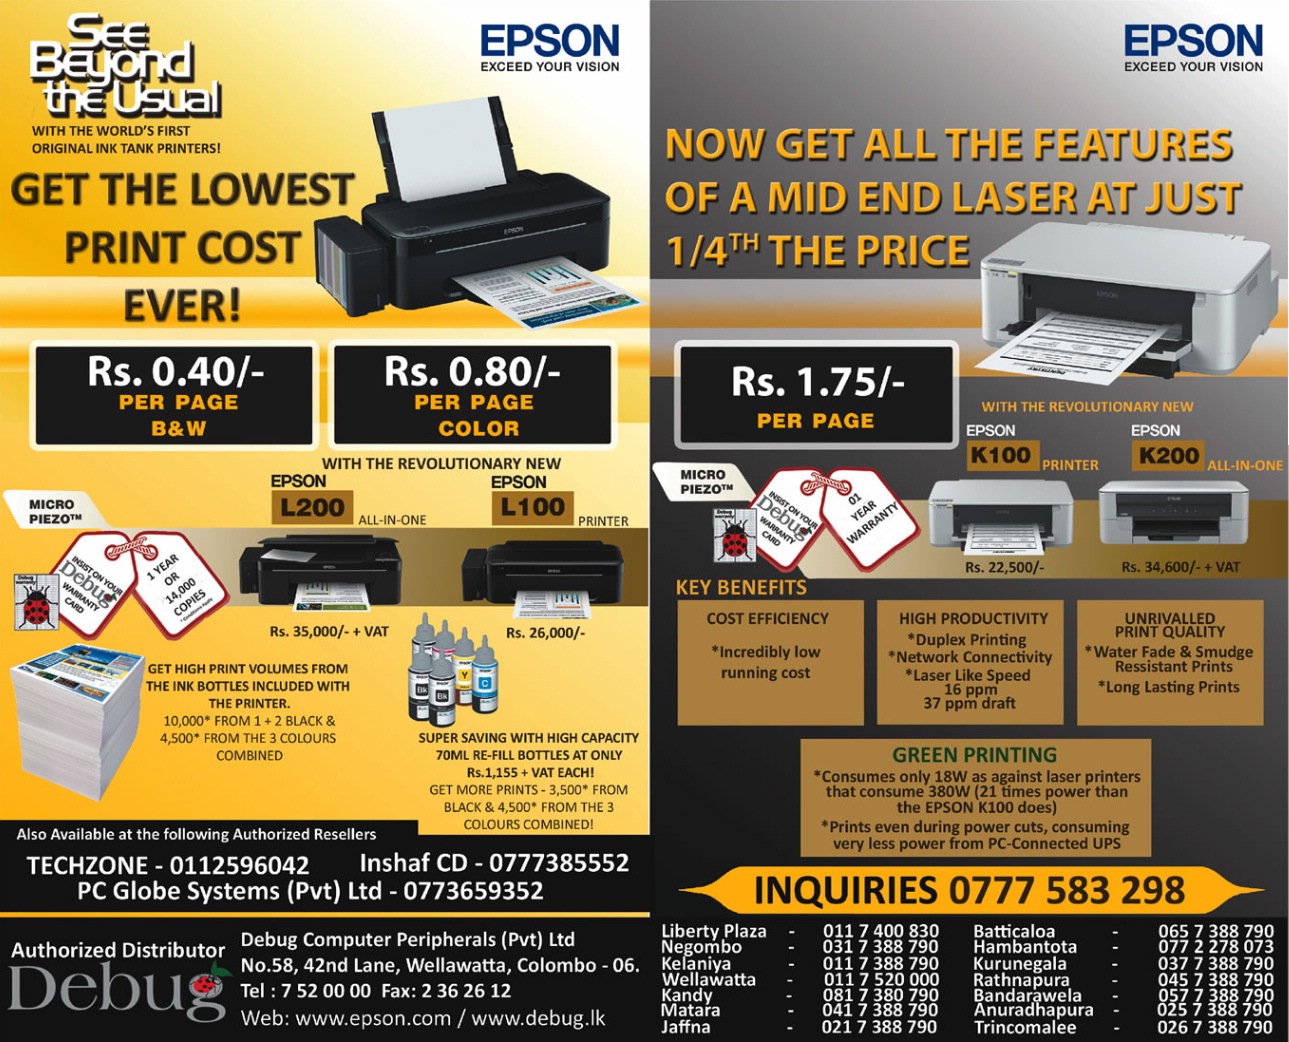 EPSON Printers and Scanners in Srilanka – Debug Computer Peripherals